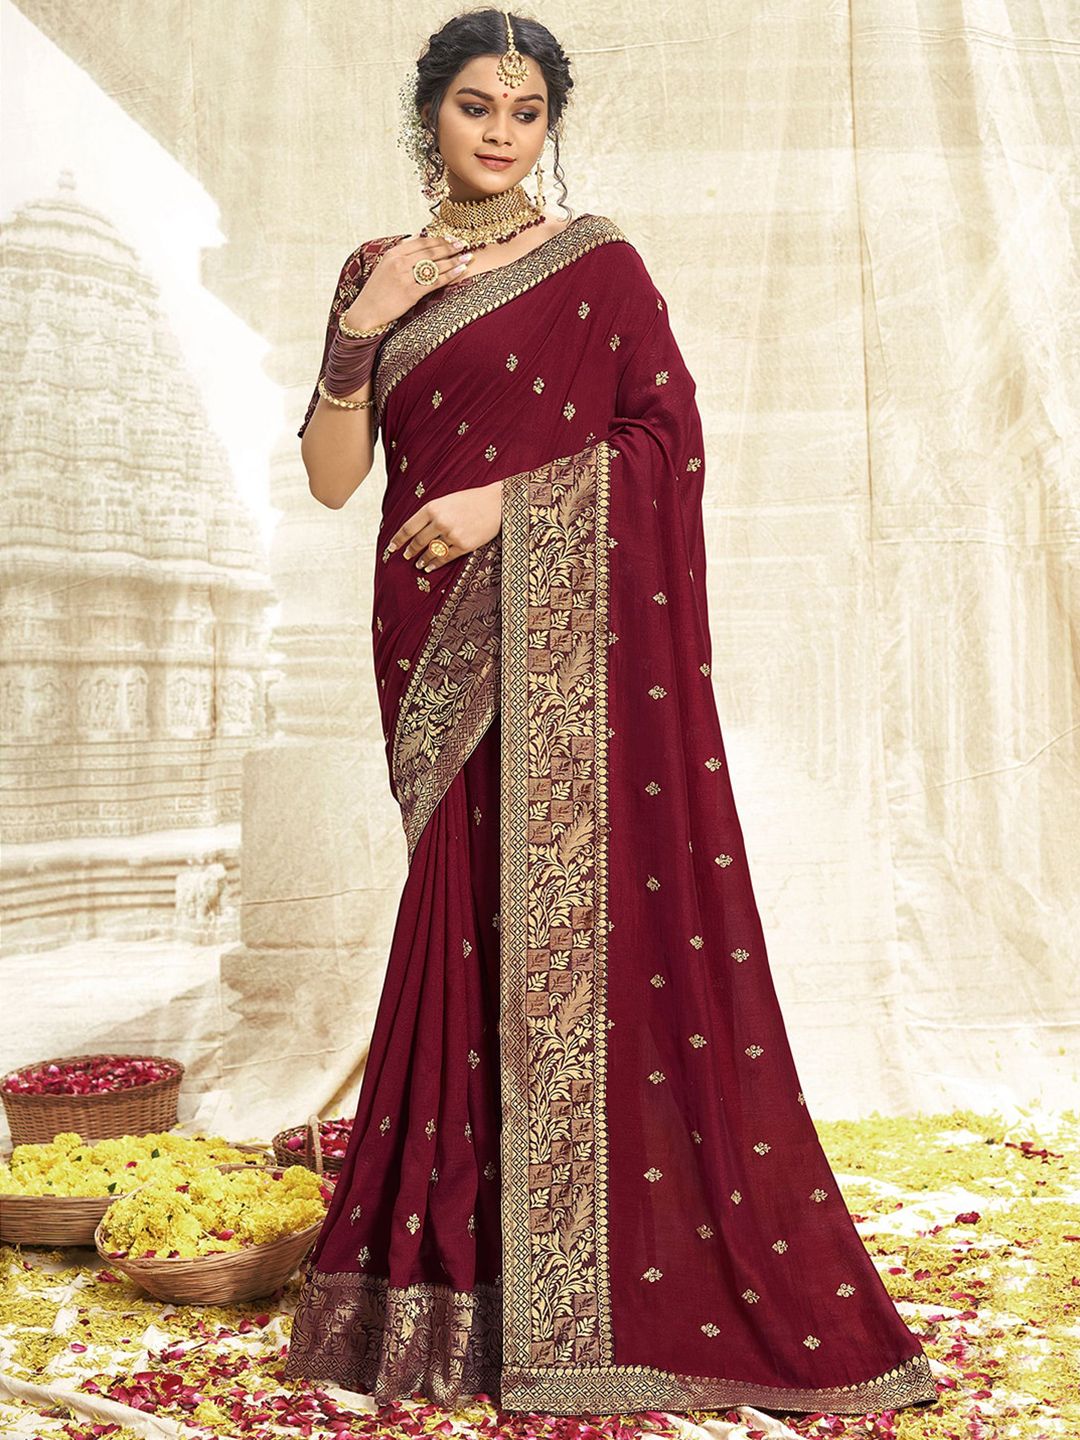 Mitera Brown & Gold-Toned Floral Embroidered Saree Price in India